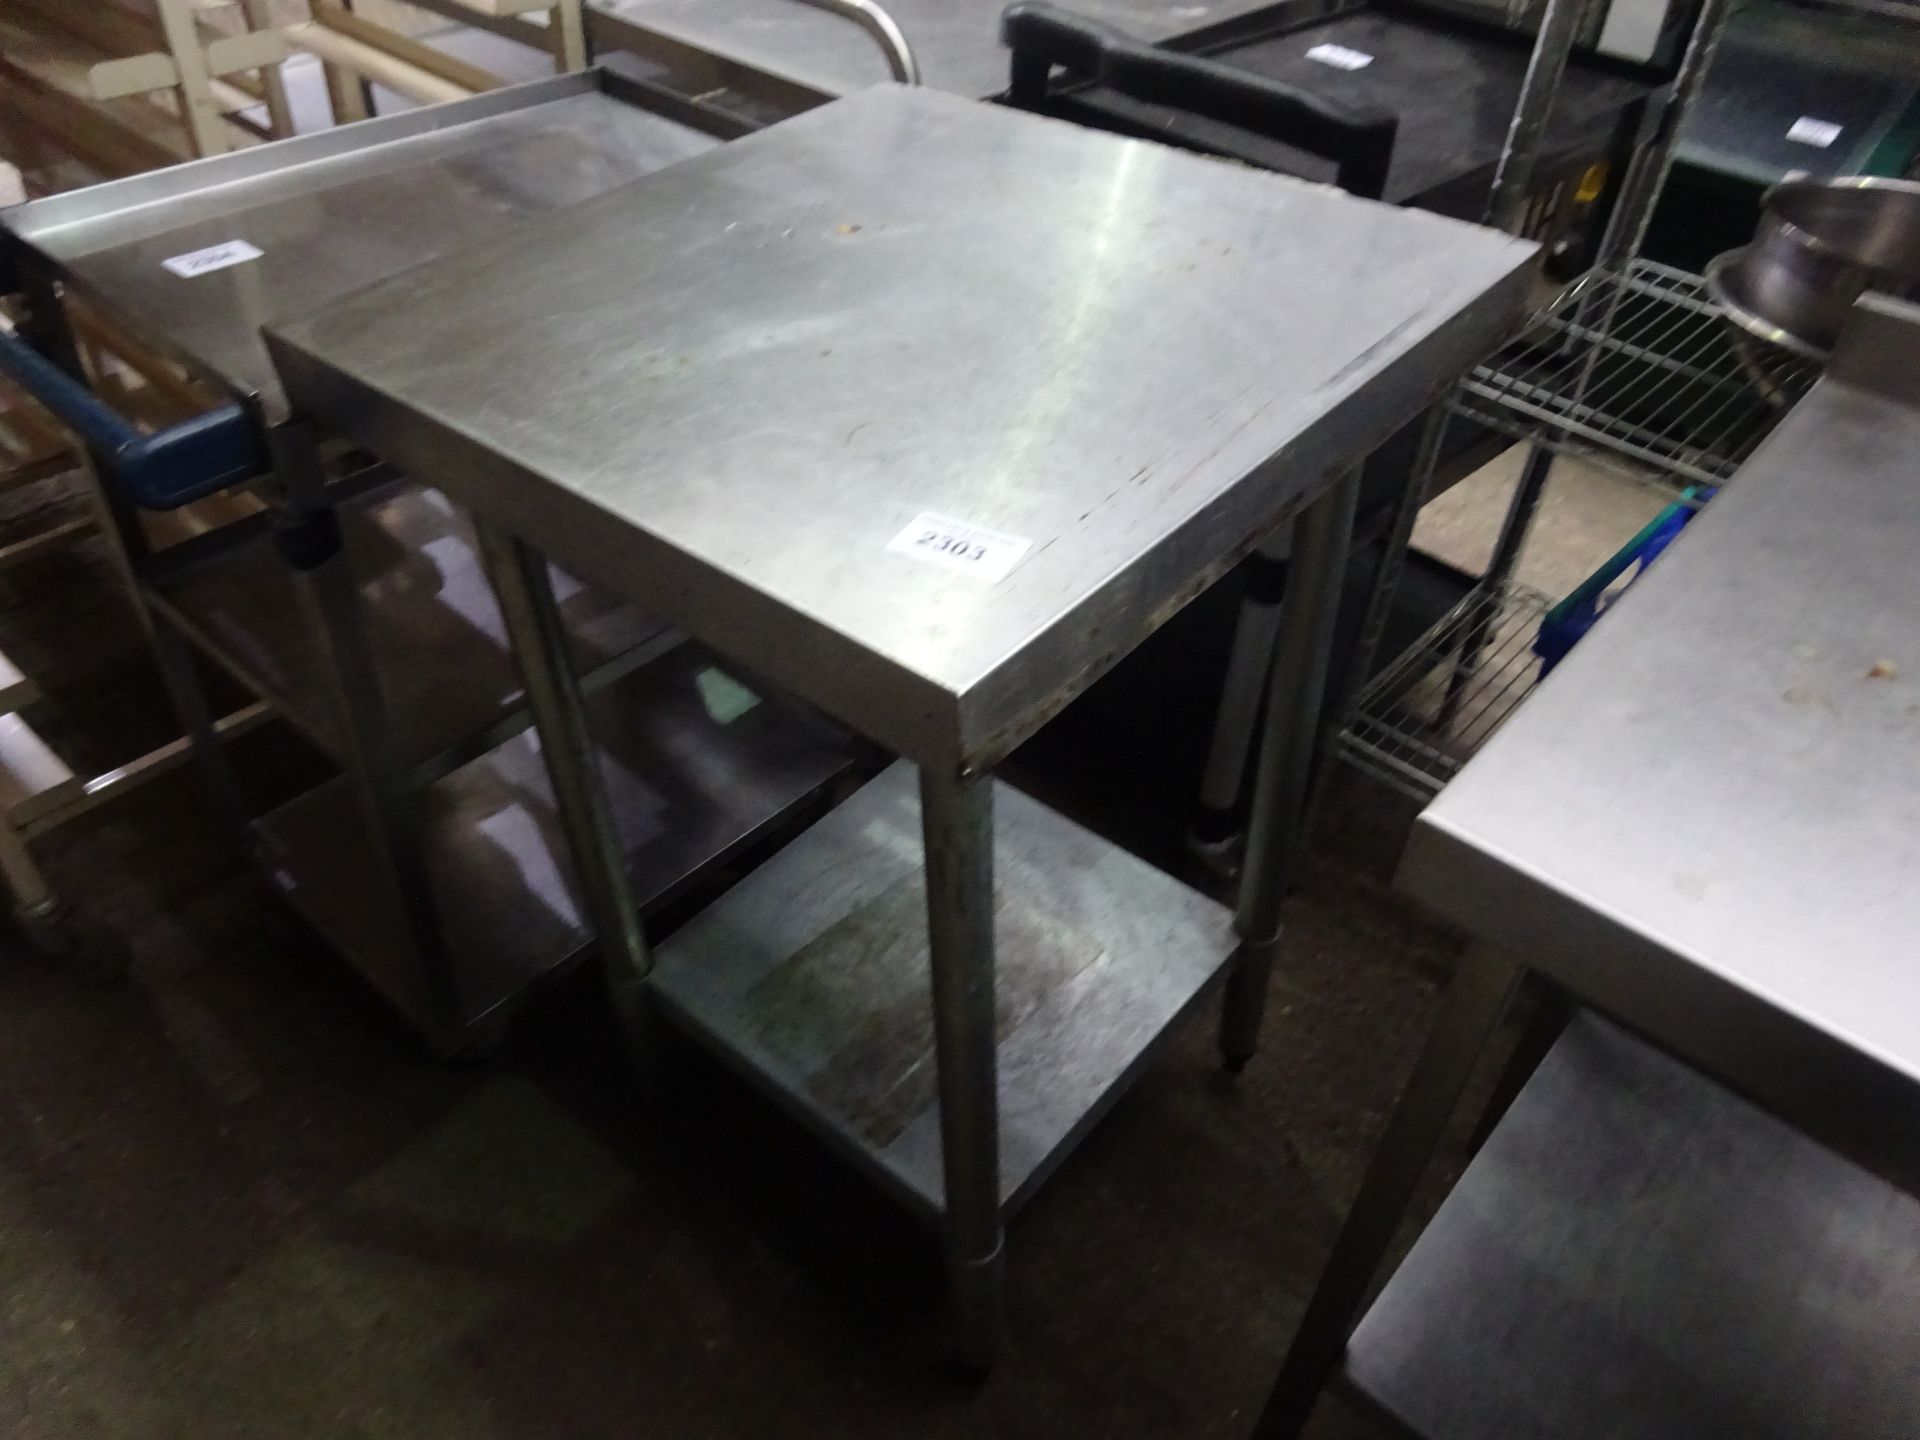 Stainless steel prep table with under shelf W: 60cms, D:60cms, H: 90cms